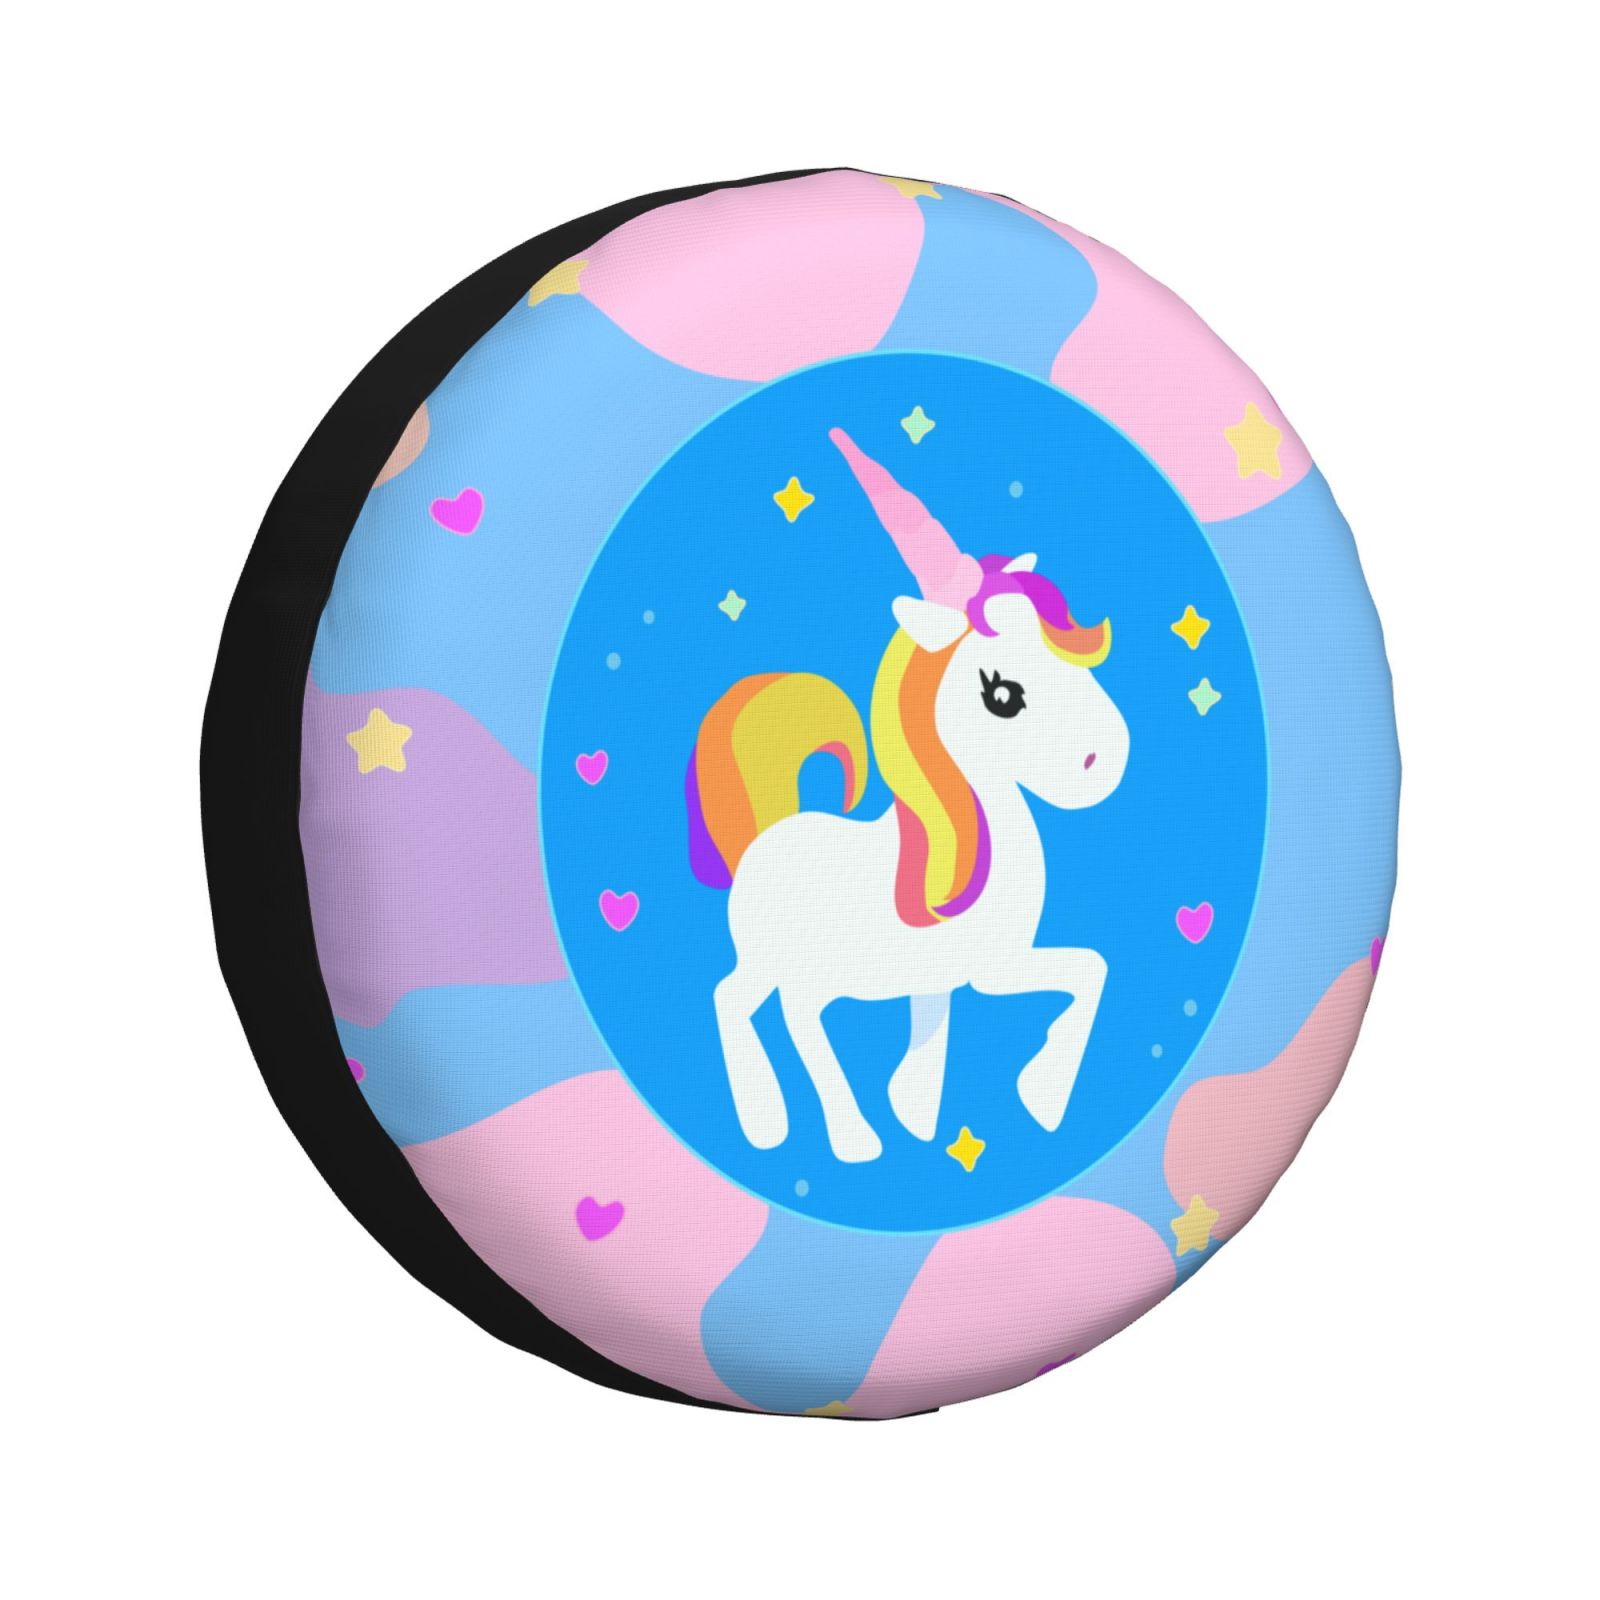 DouZhe Waterproof Spare Tire Cover, Cute Cartoon Sparkle Stars Unicorn  Prints Adjustable Wheel Covers Fit for Jeep Trailer RV SUV Car, 17 inch 